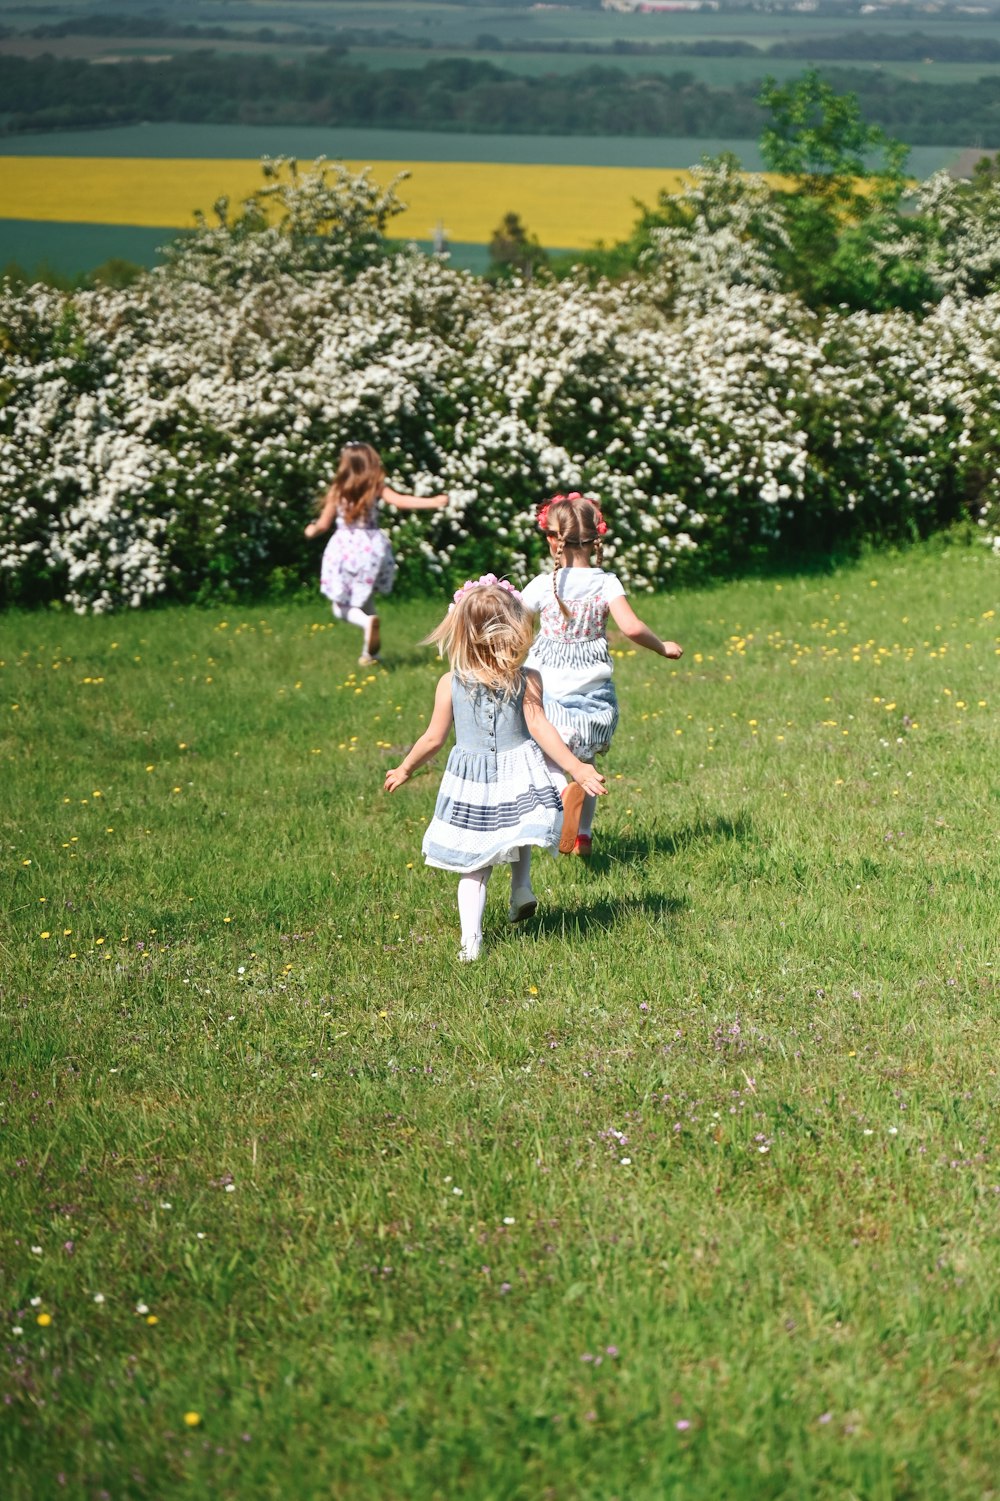 a group of young girls running across a lush green field